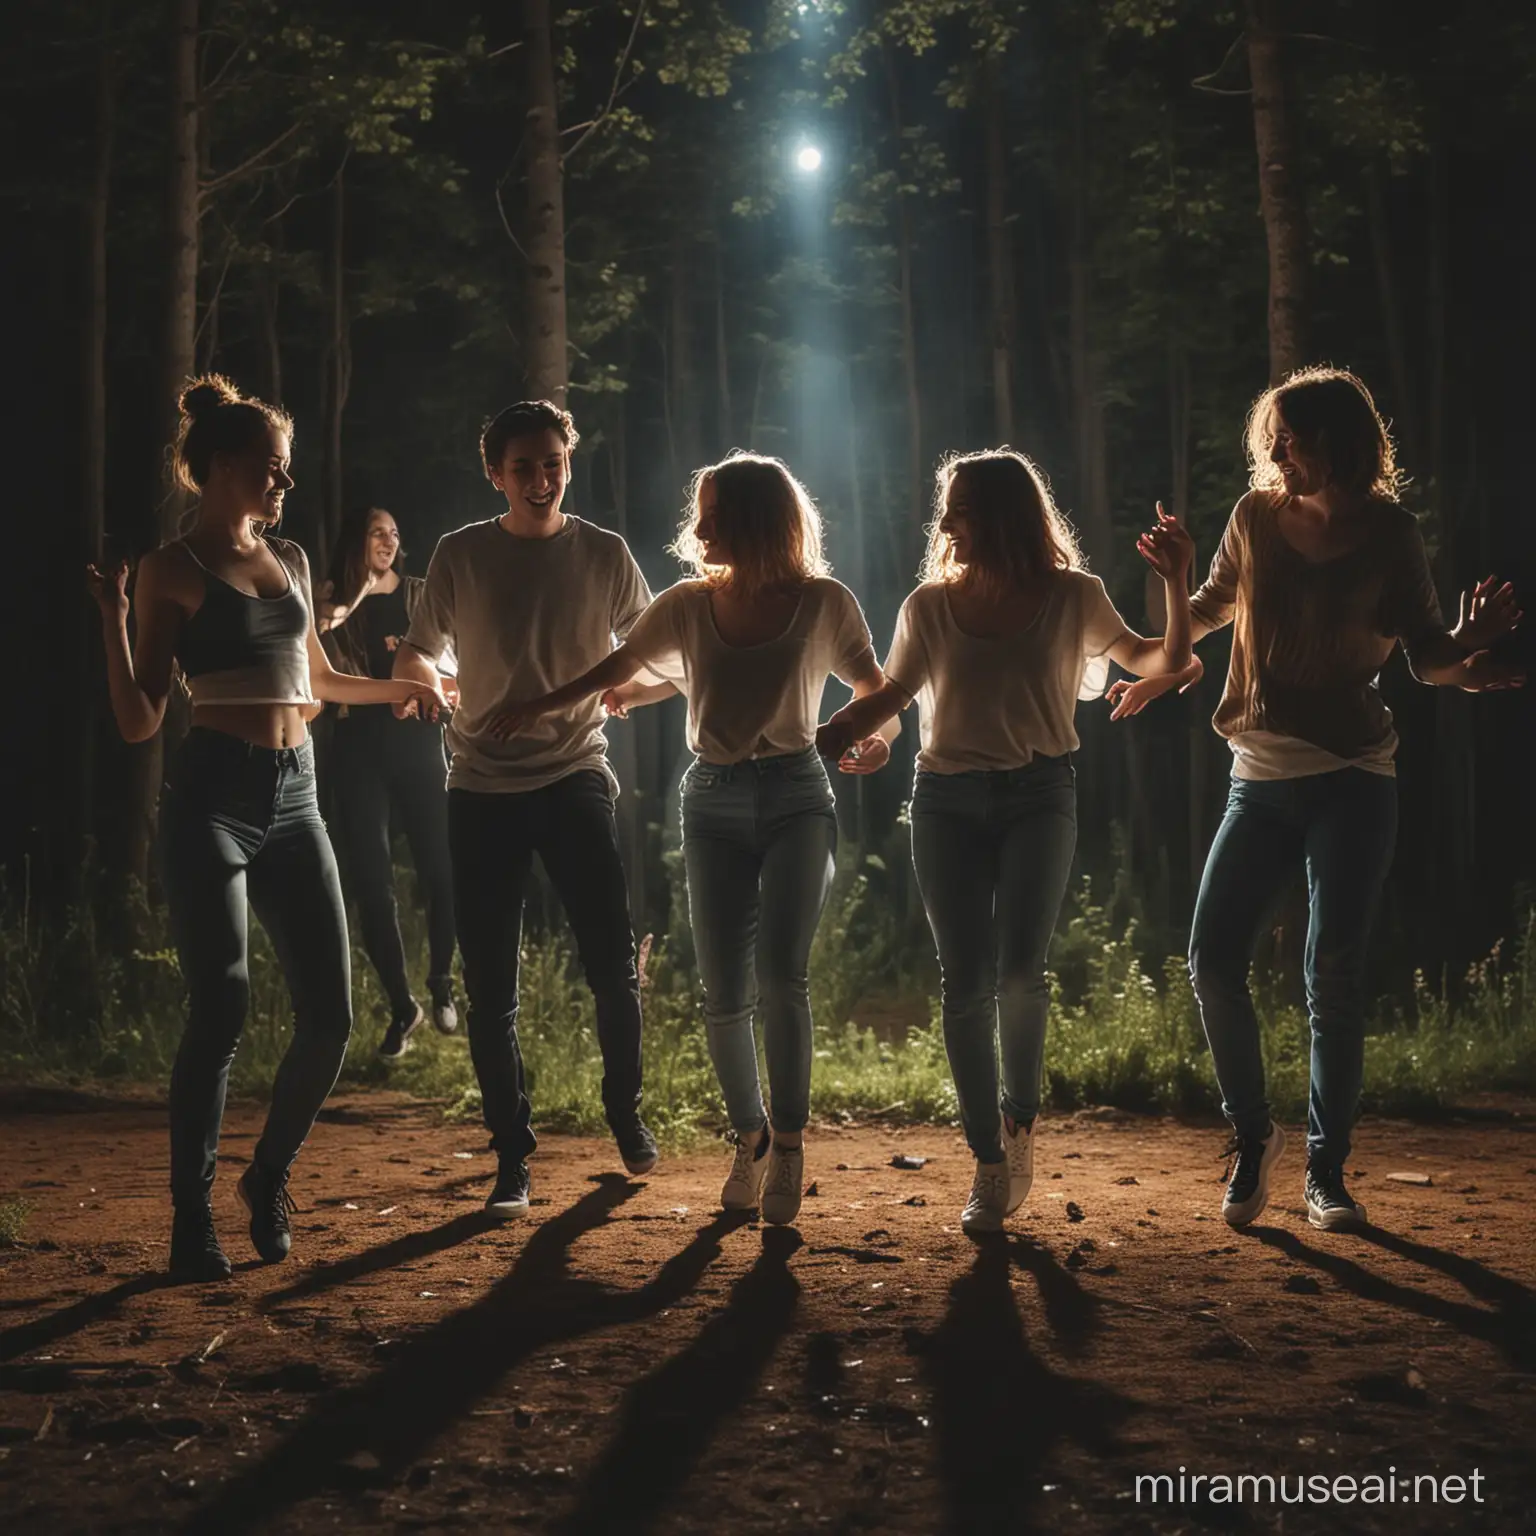 Group of young people dancing in the forest at night